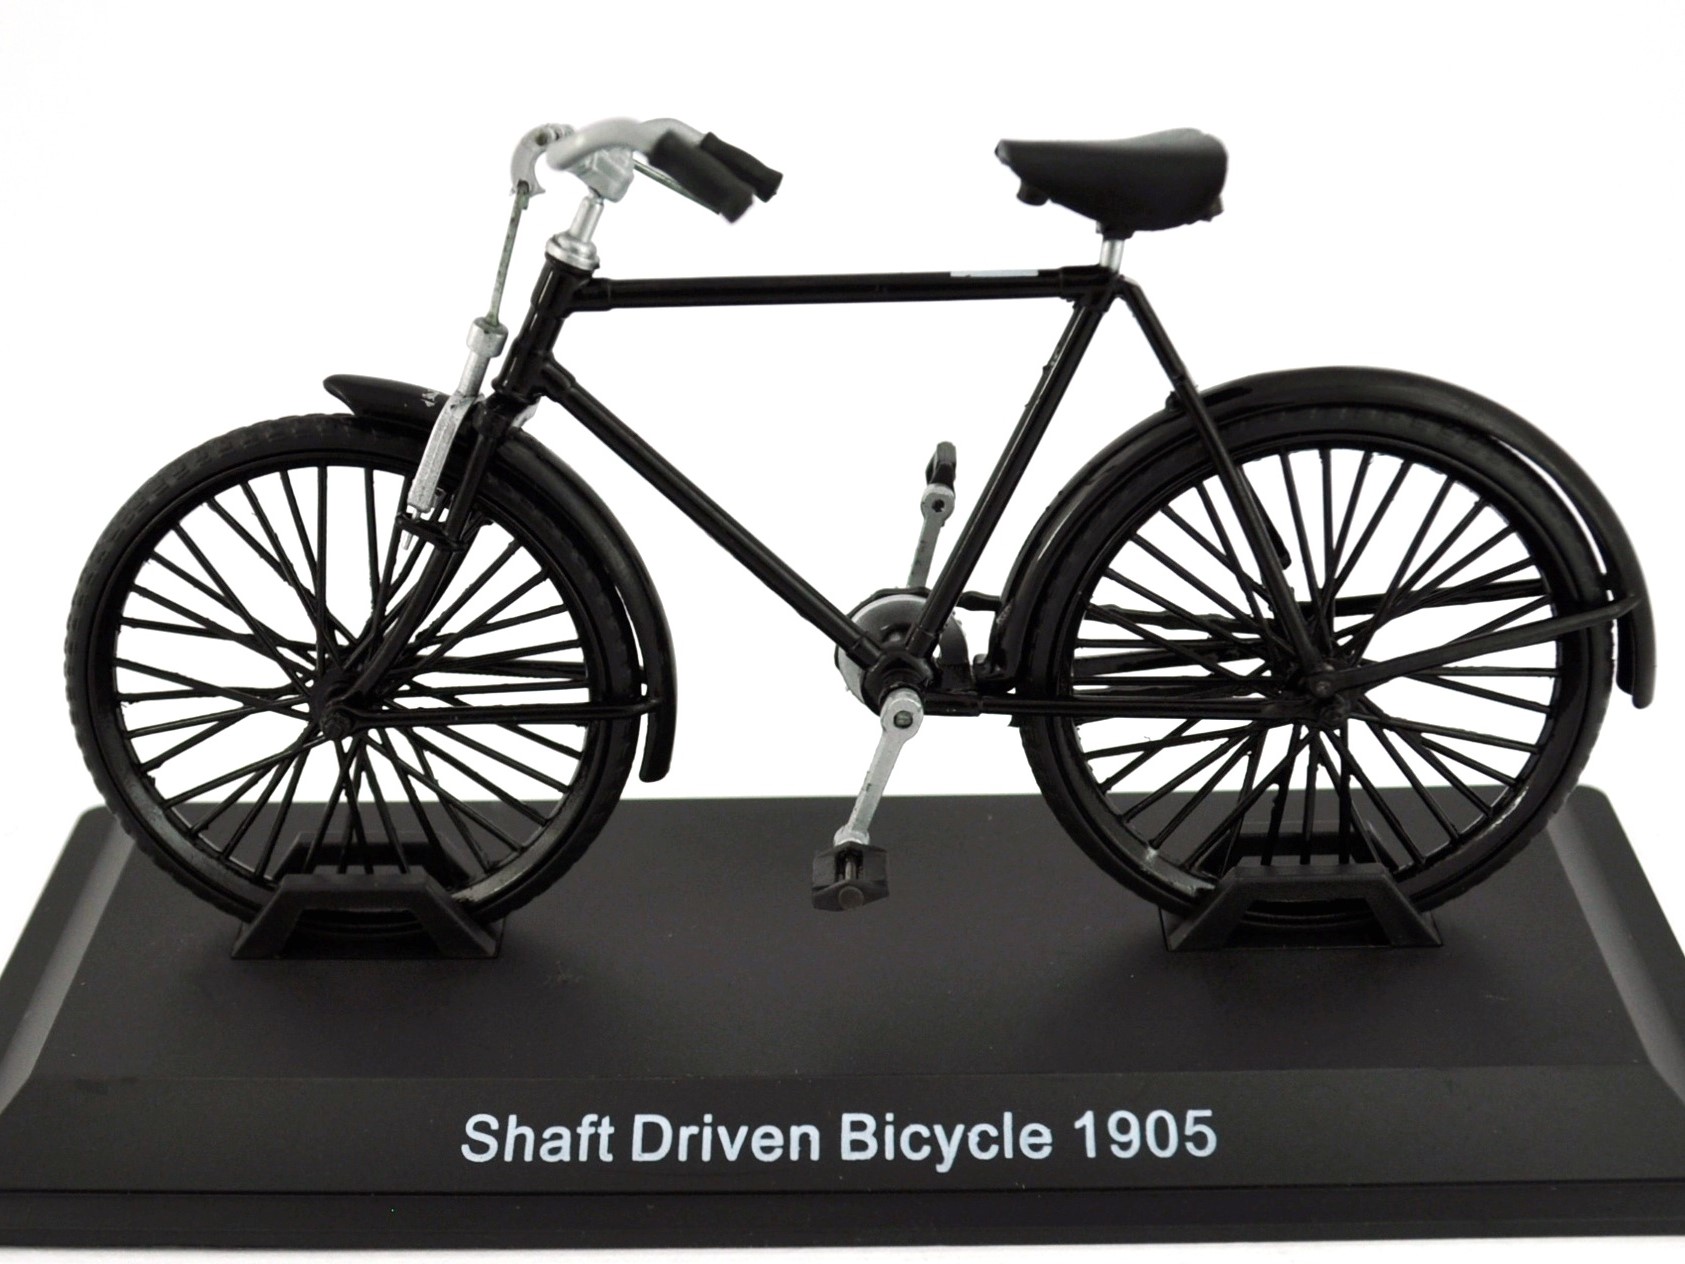 Shaft Driven Bicycle